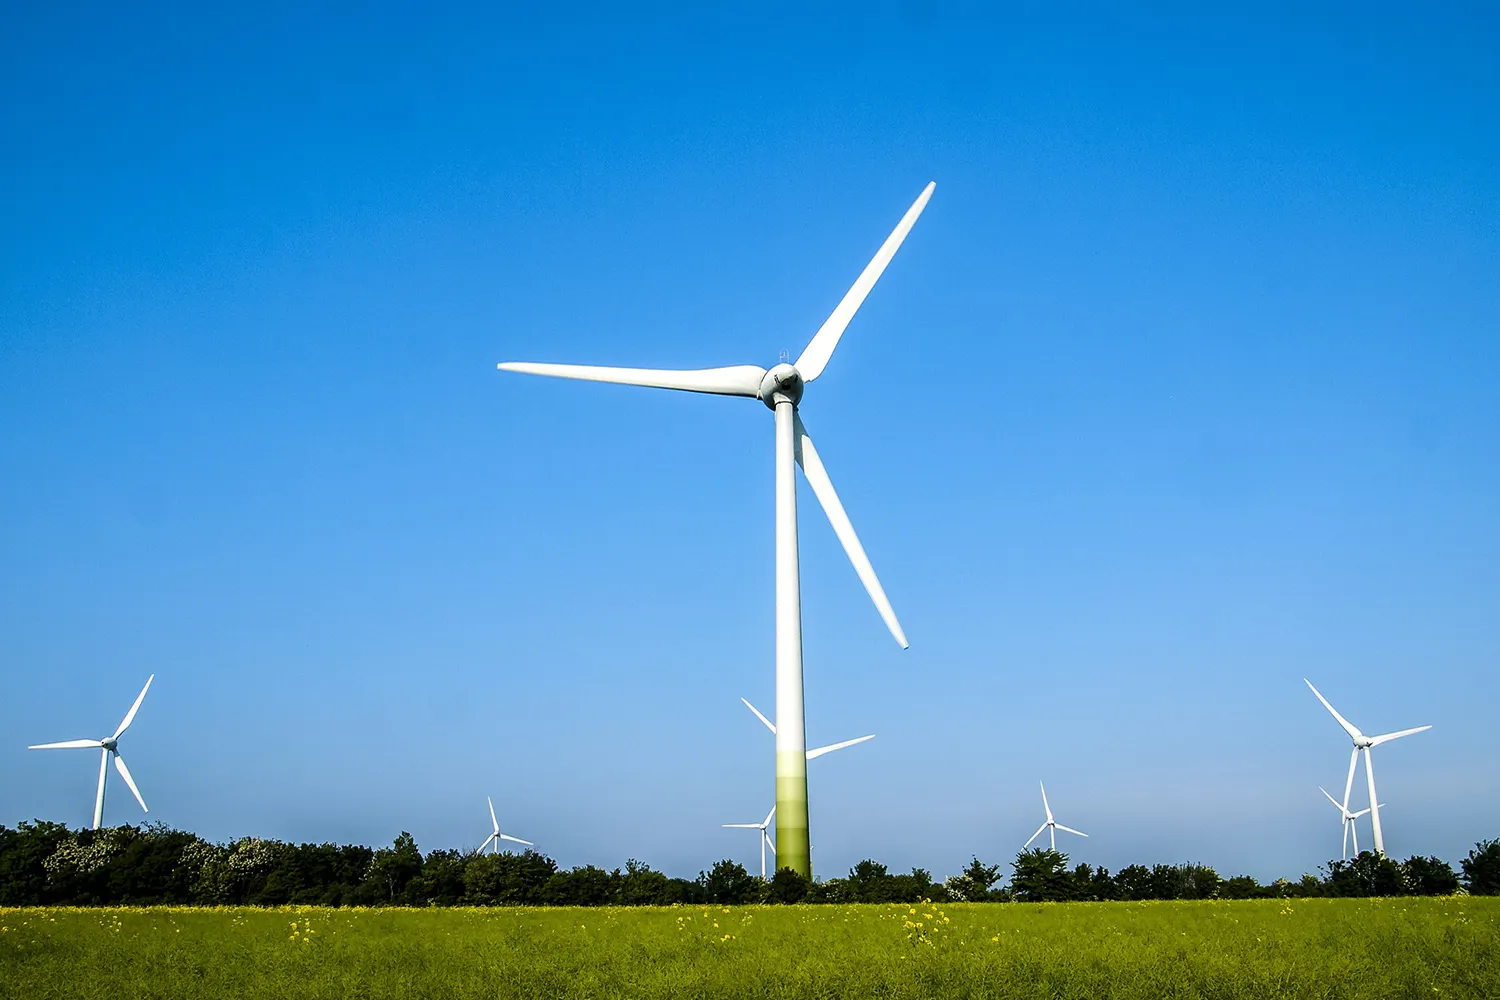 Image of several wind turbines as a symbolic image for the co2 performance ladder.